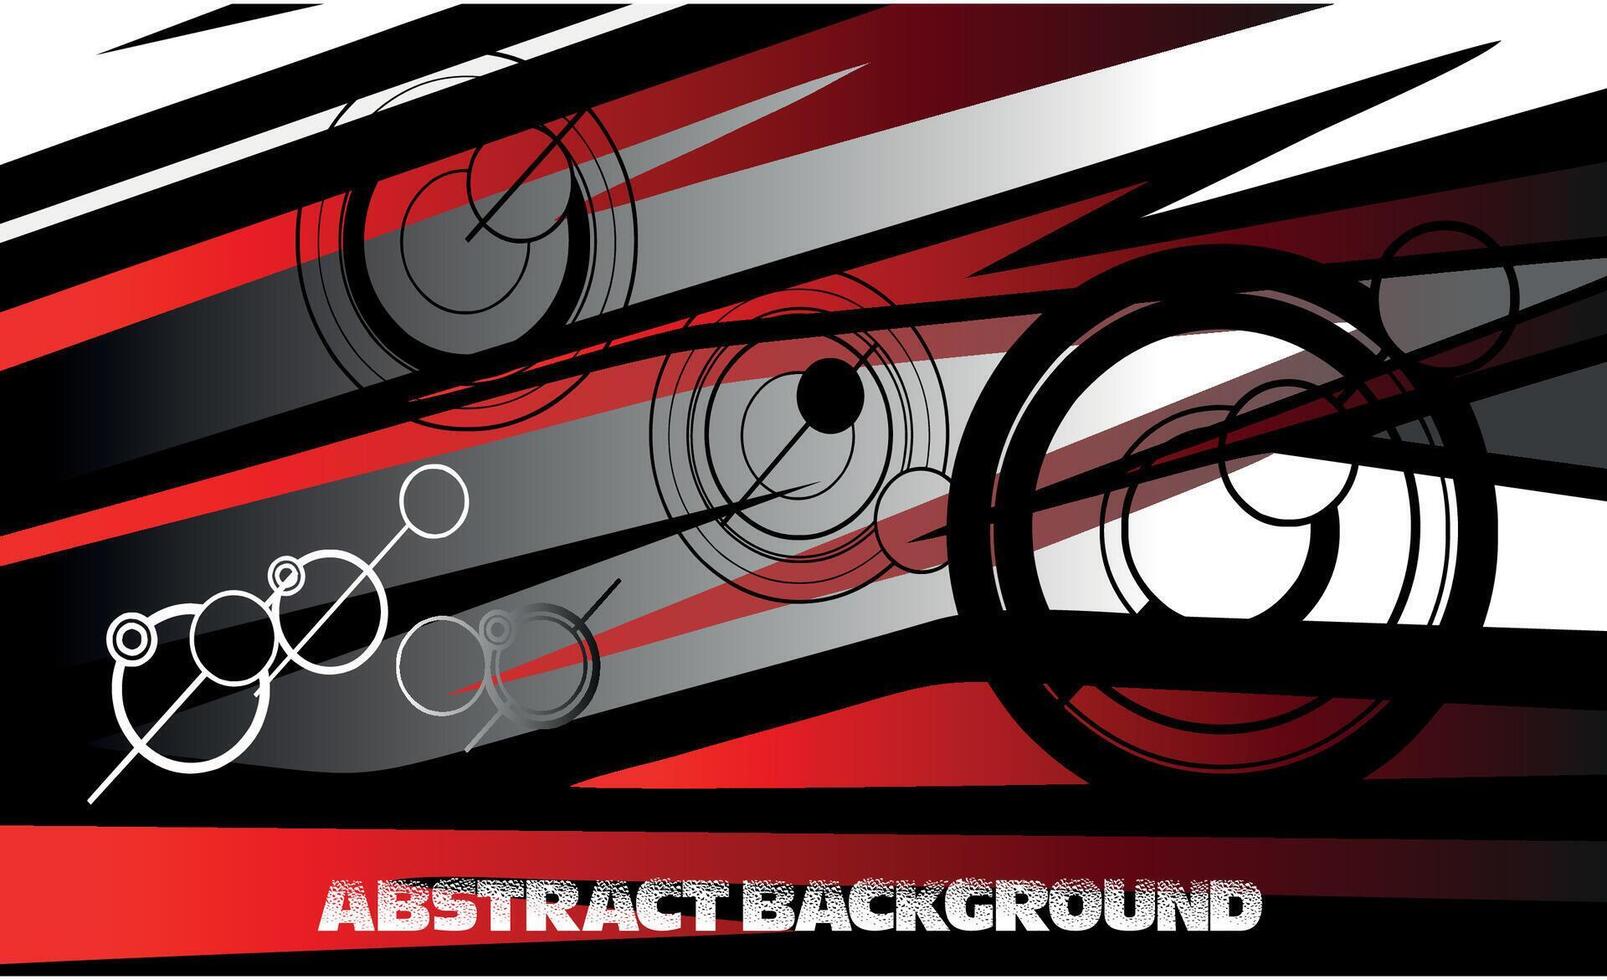 Abstract graphic line racing background kit vector design for vehicle, race car, rally, banner and livery wrapping